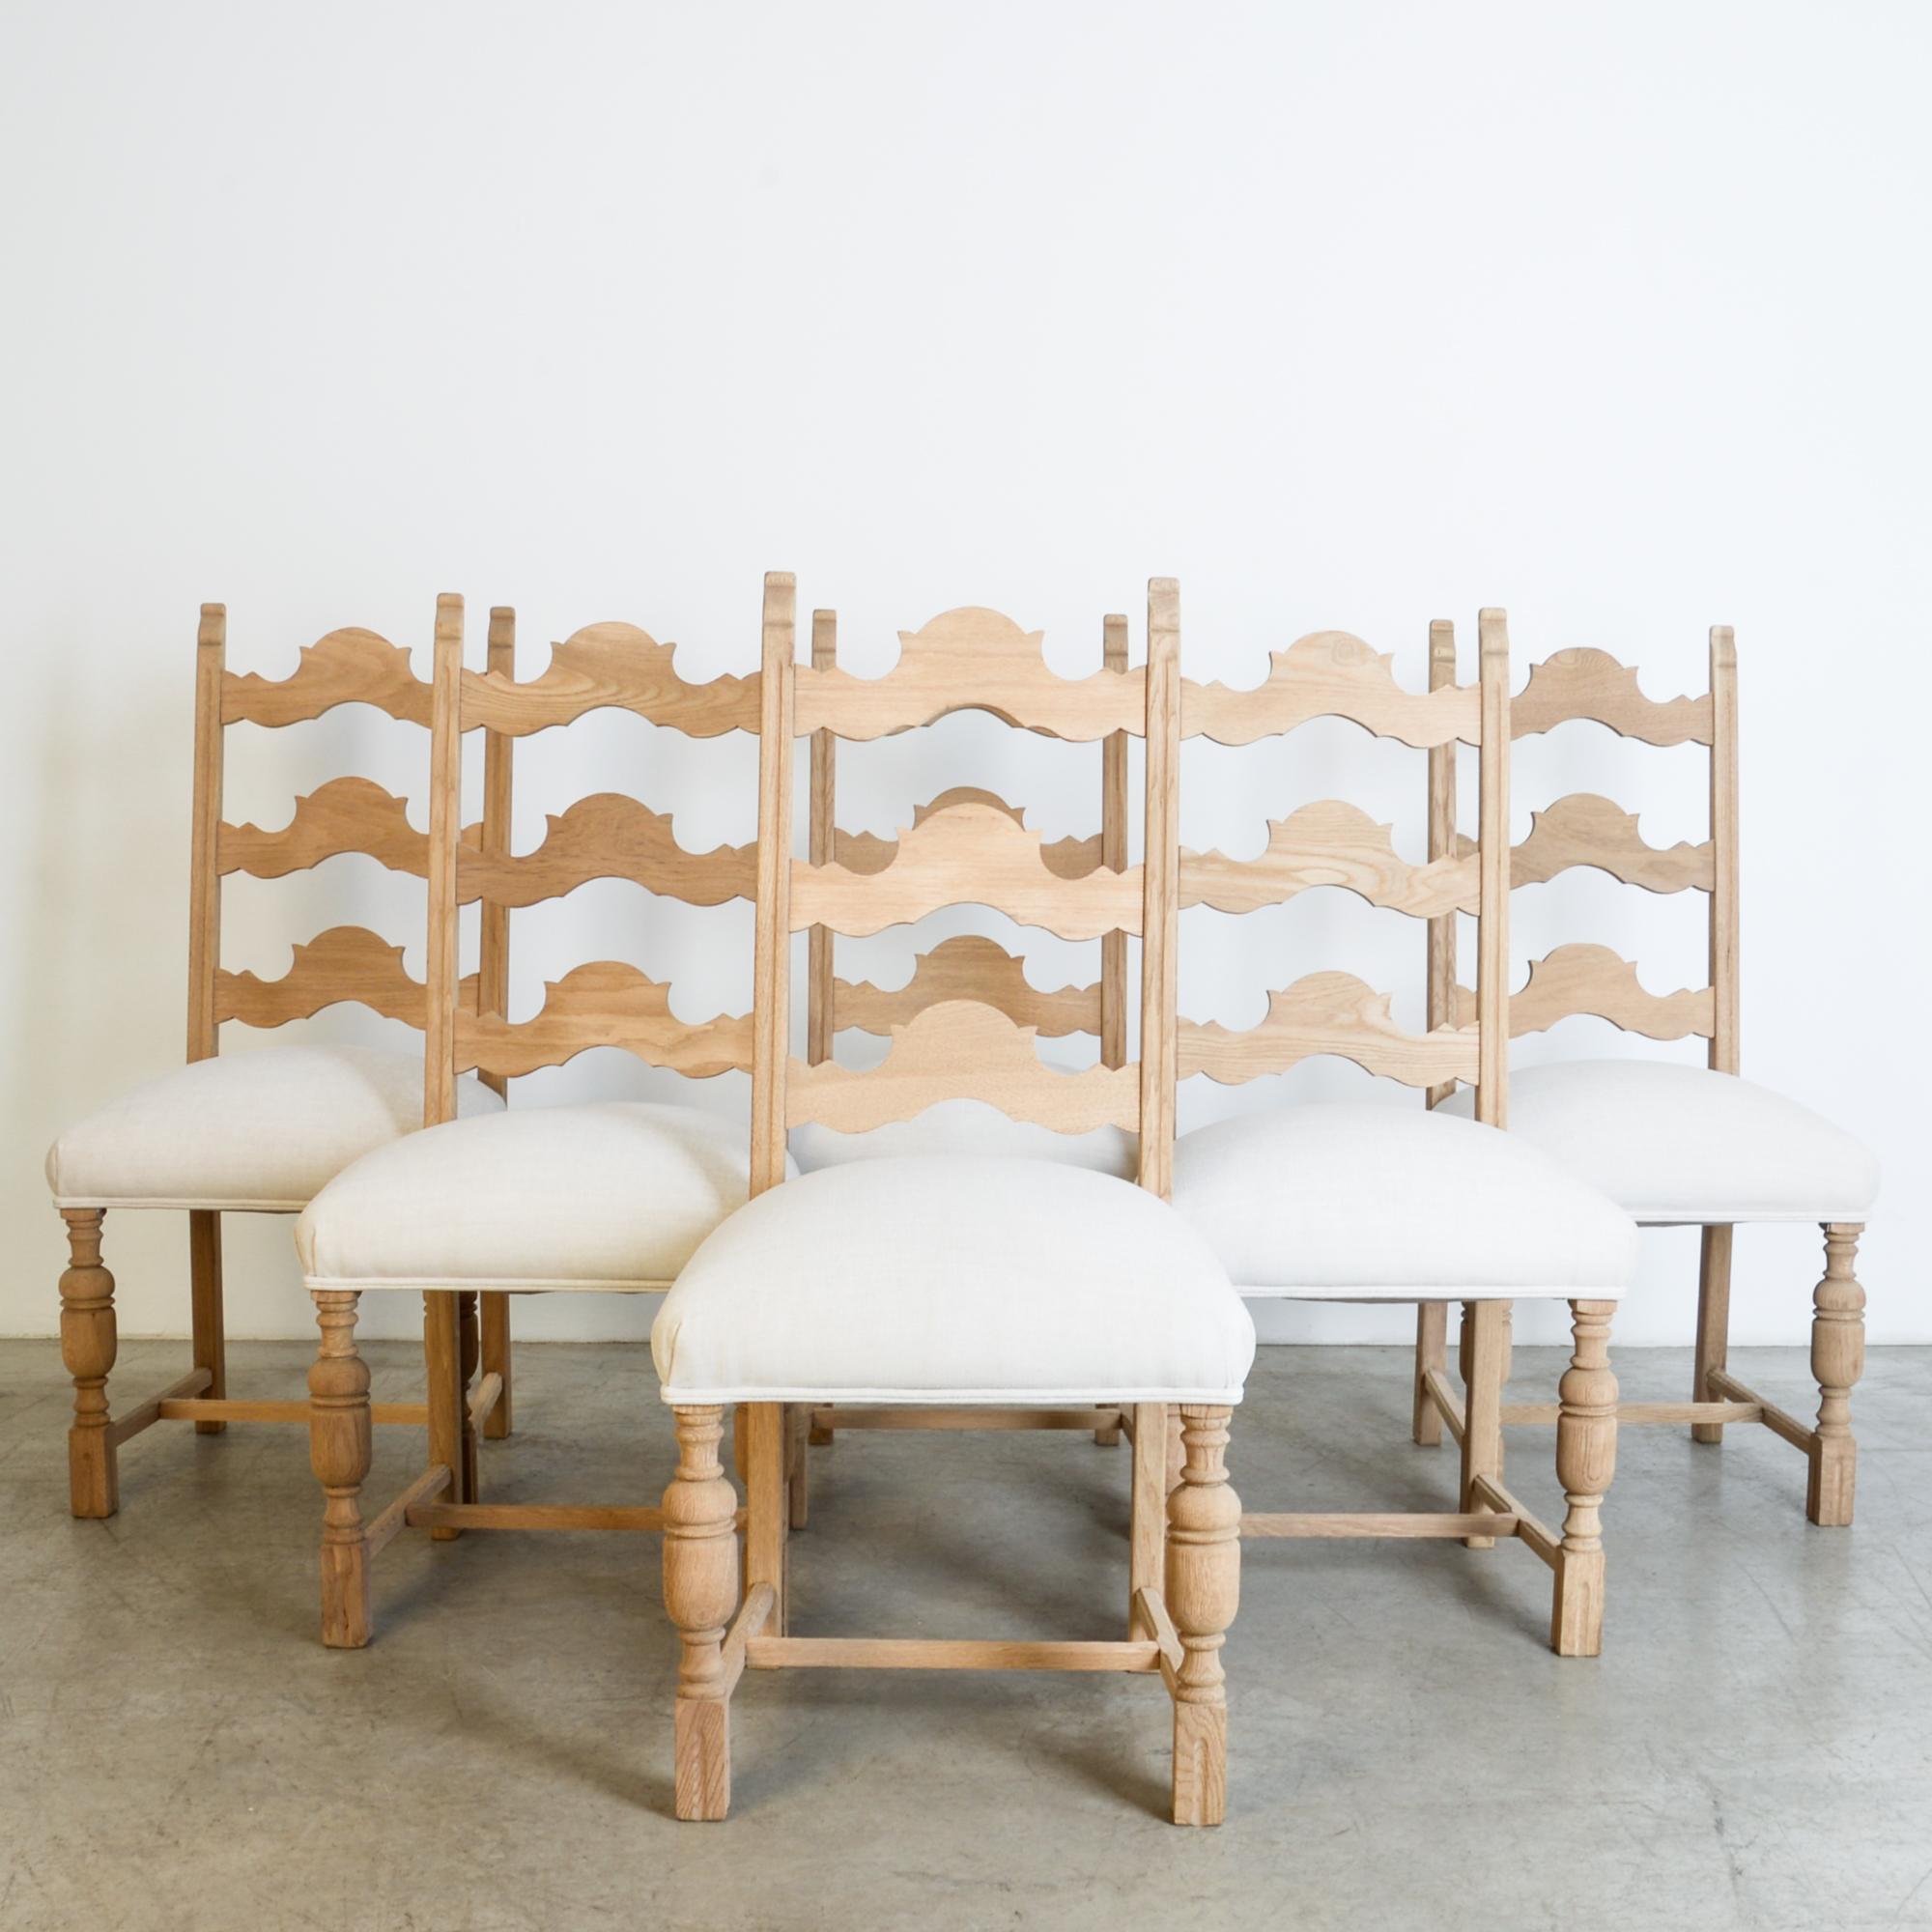 A 1950s fashion, traditional furniture forms are simplified, updated through a contemporary lens. High quality oak construction maintains the essential vocabulary of French style with scalloped rails, turned front legs and carved ears, for an